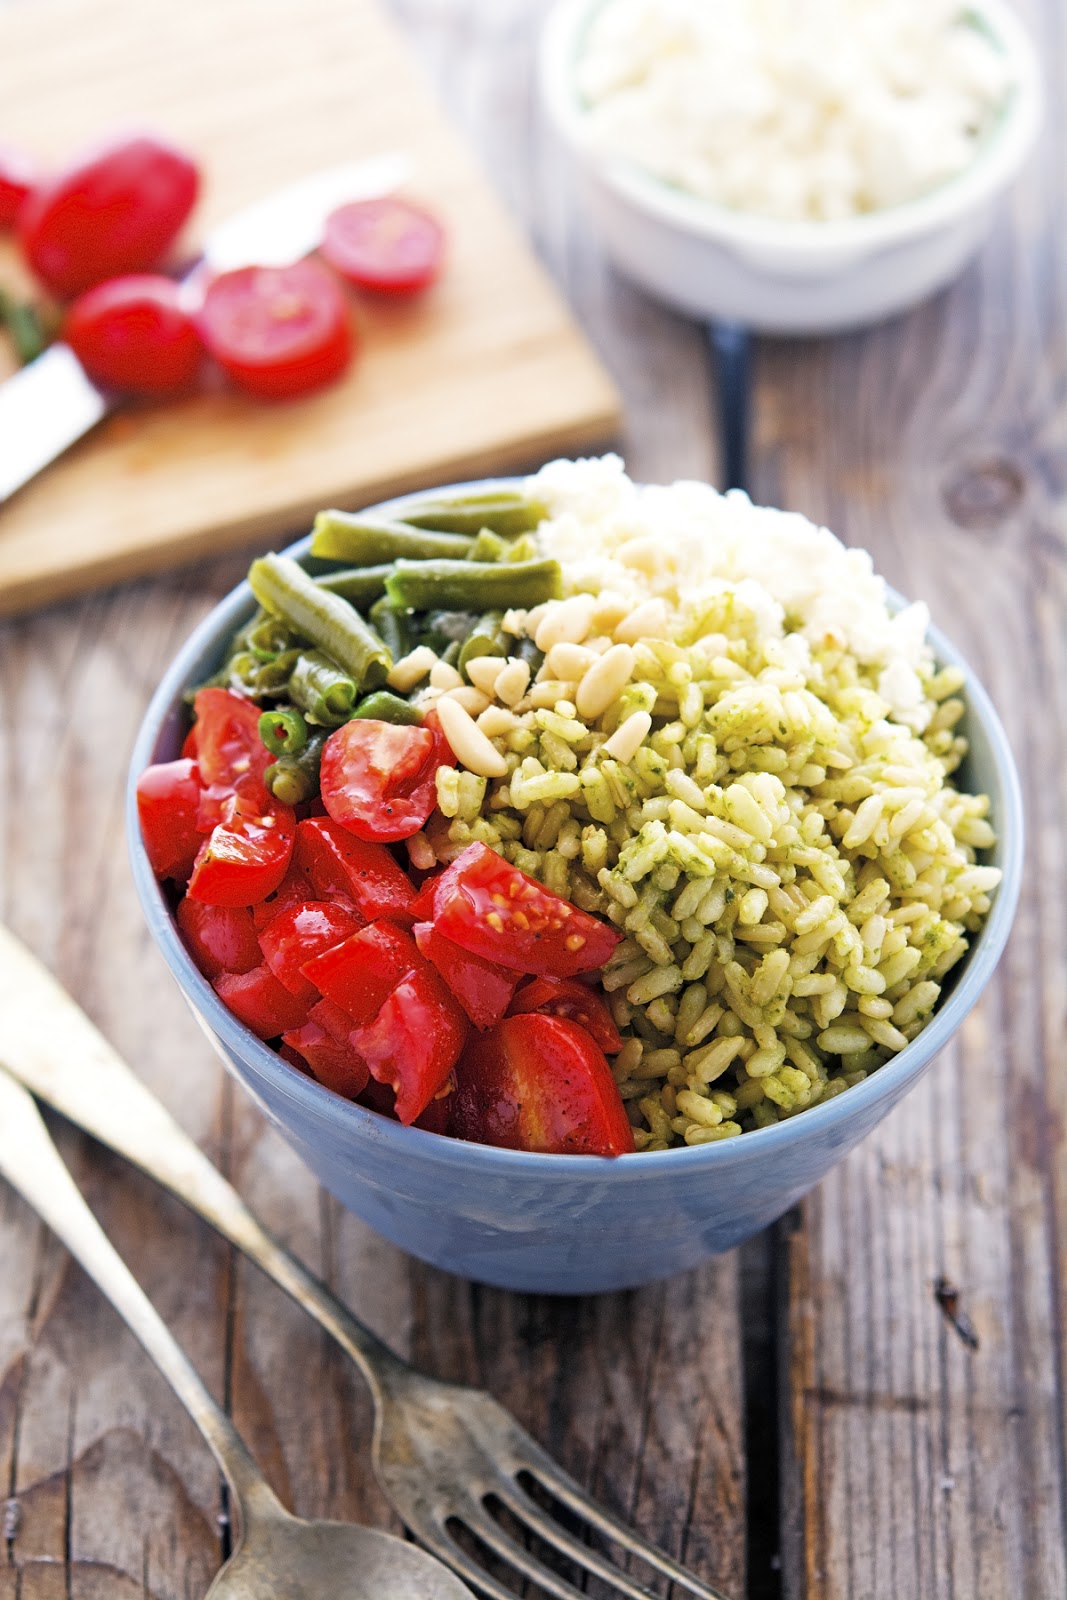 Pesto Rice Salad Bowls with Tomatoes, Green Beans and Feta